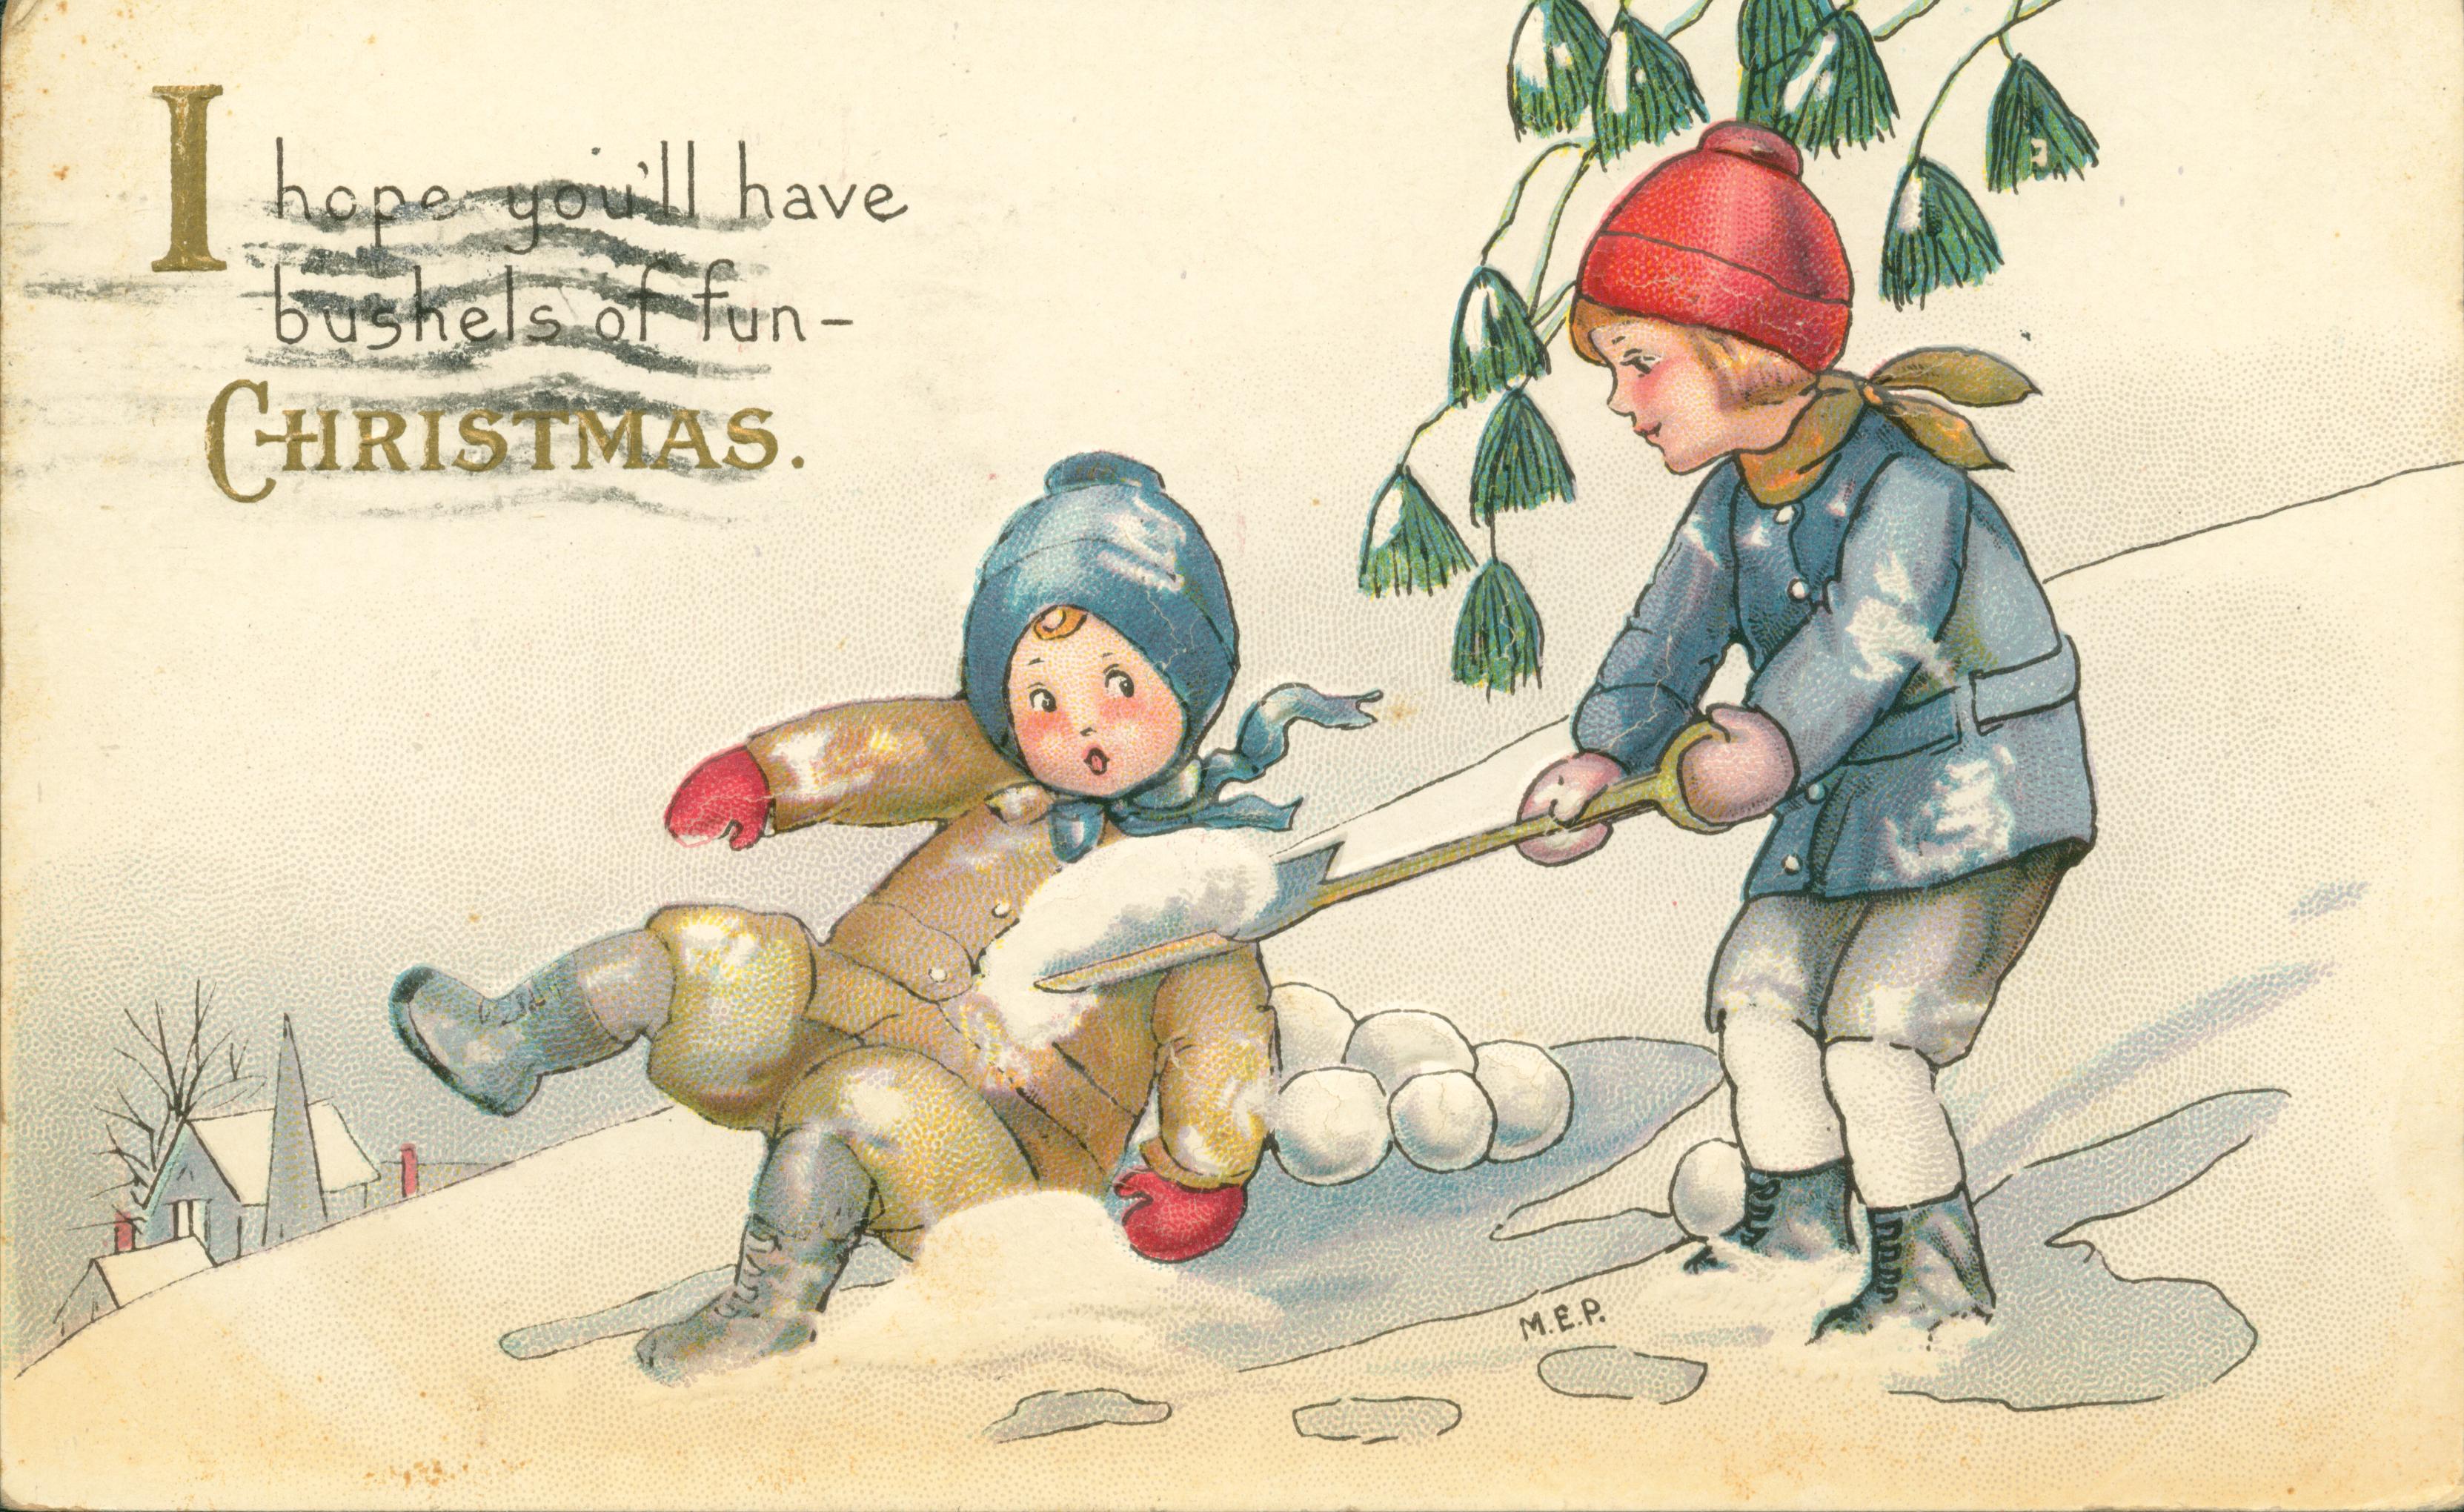 Shows two children playing in the snow